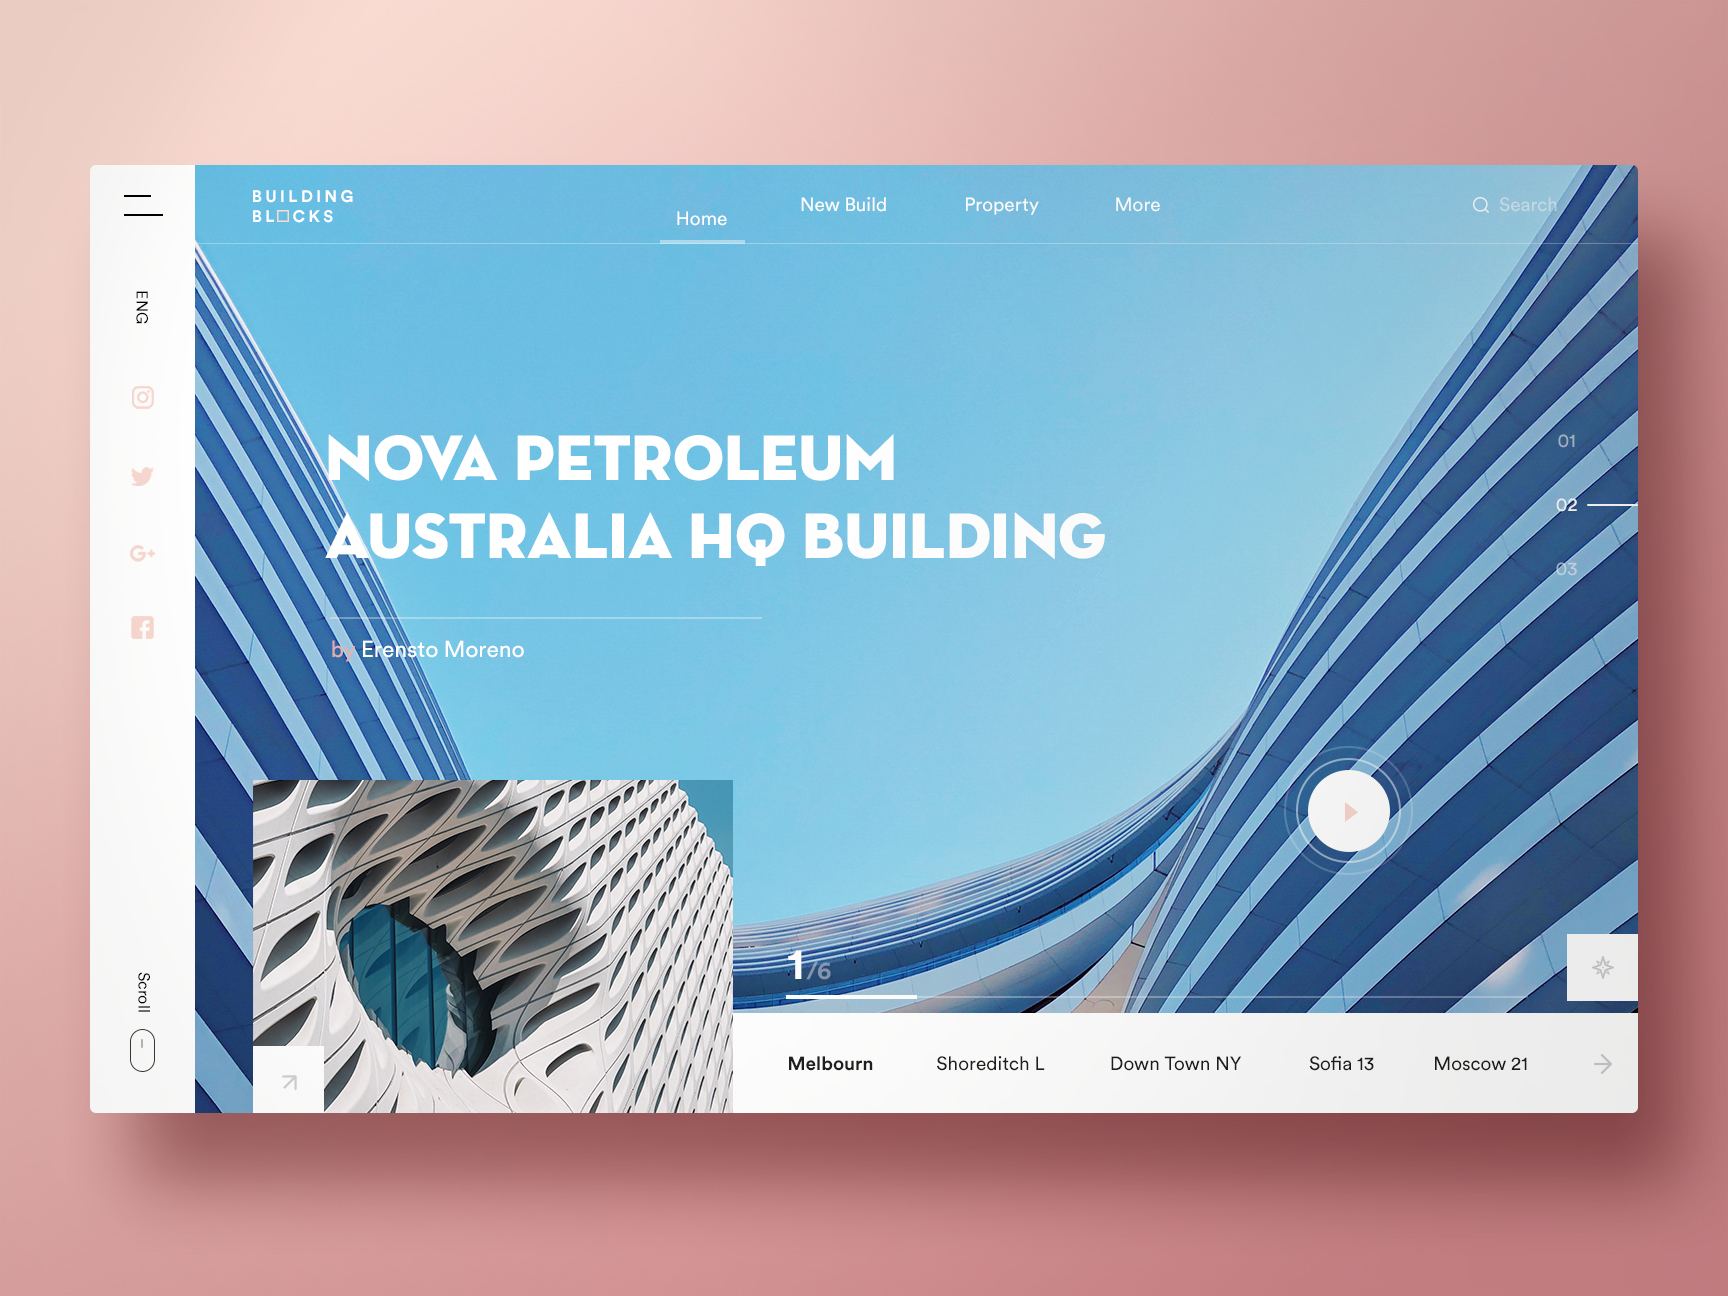 Profile Page screen design idea #66: Visual Design Inspiration for your Monday Morning